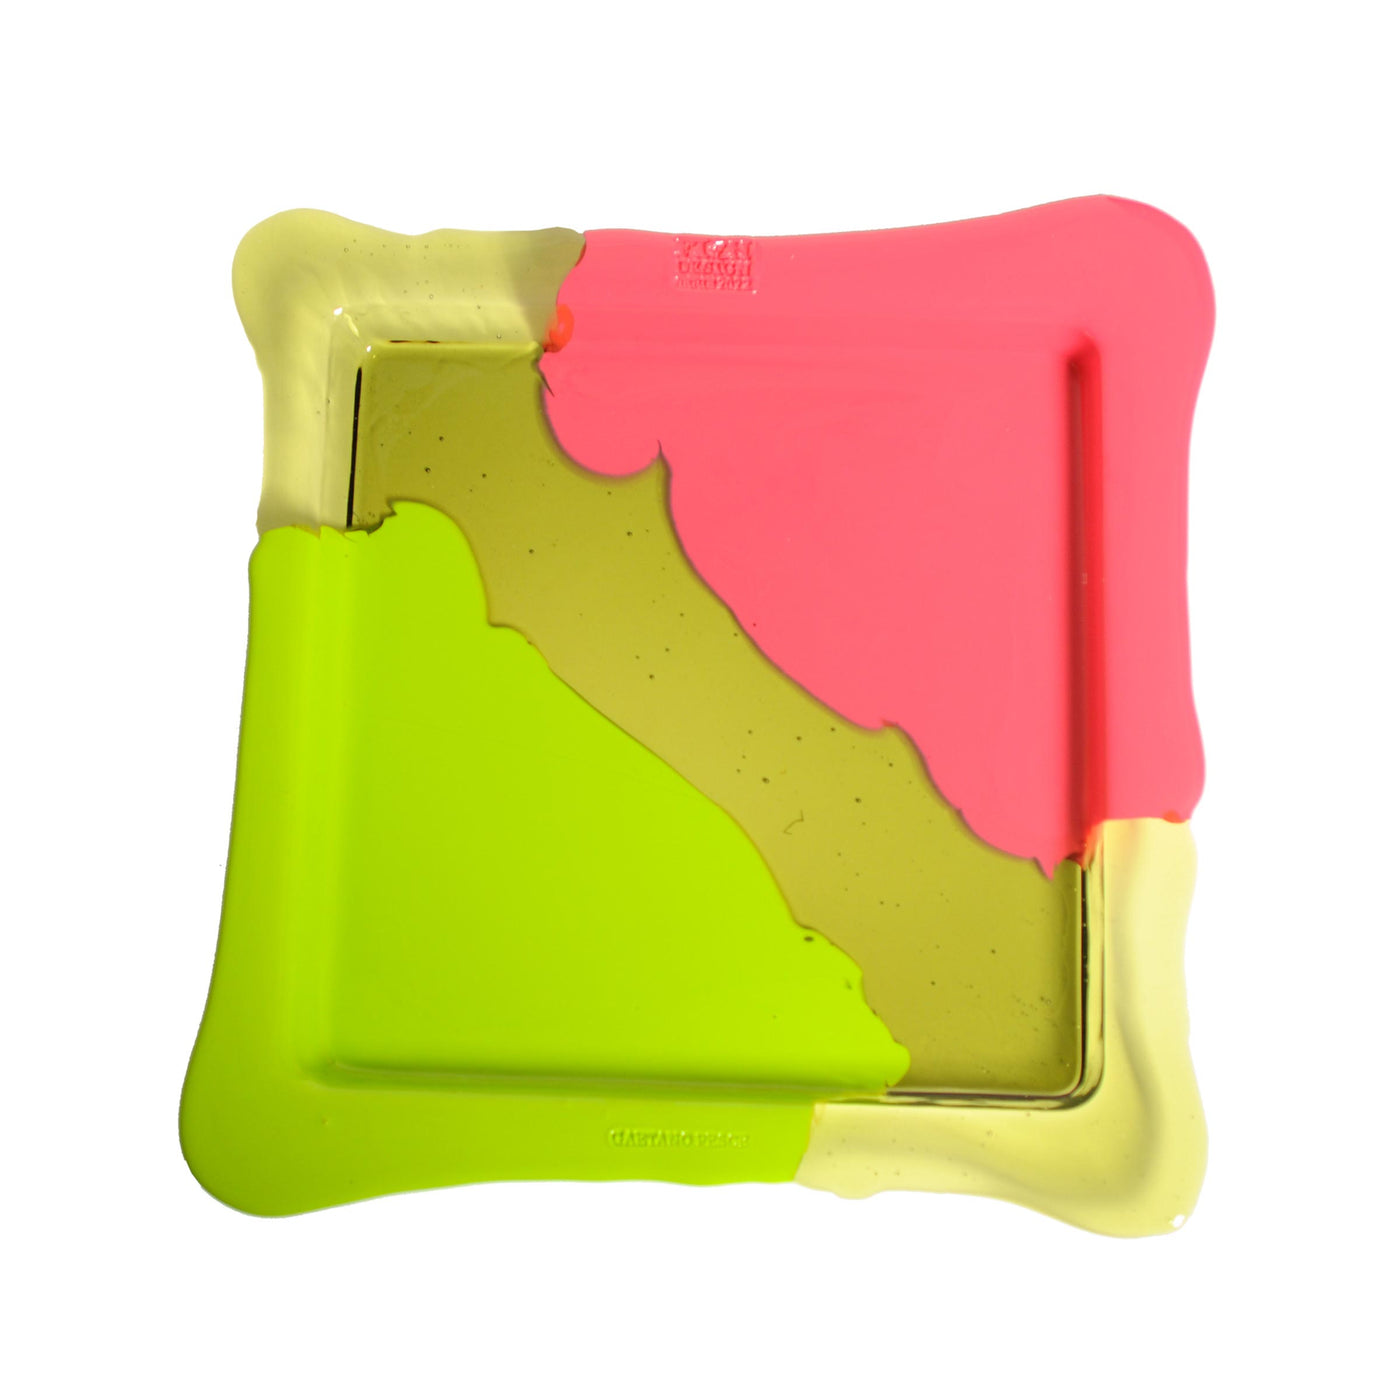 Resin Square Tray TRY-TRAY Light Green by Gaetano Pesce for Fish Design 02